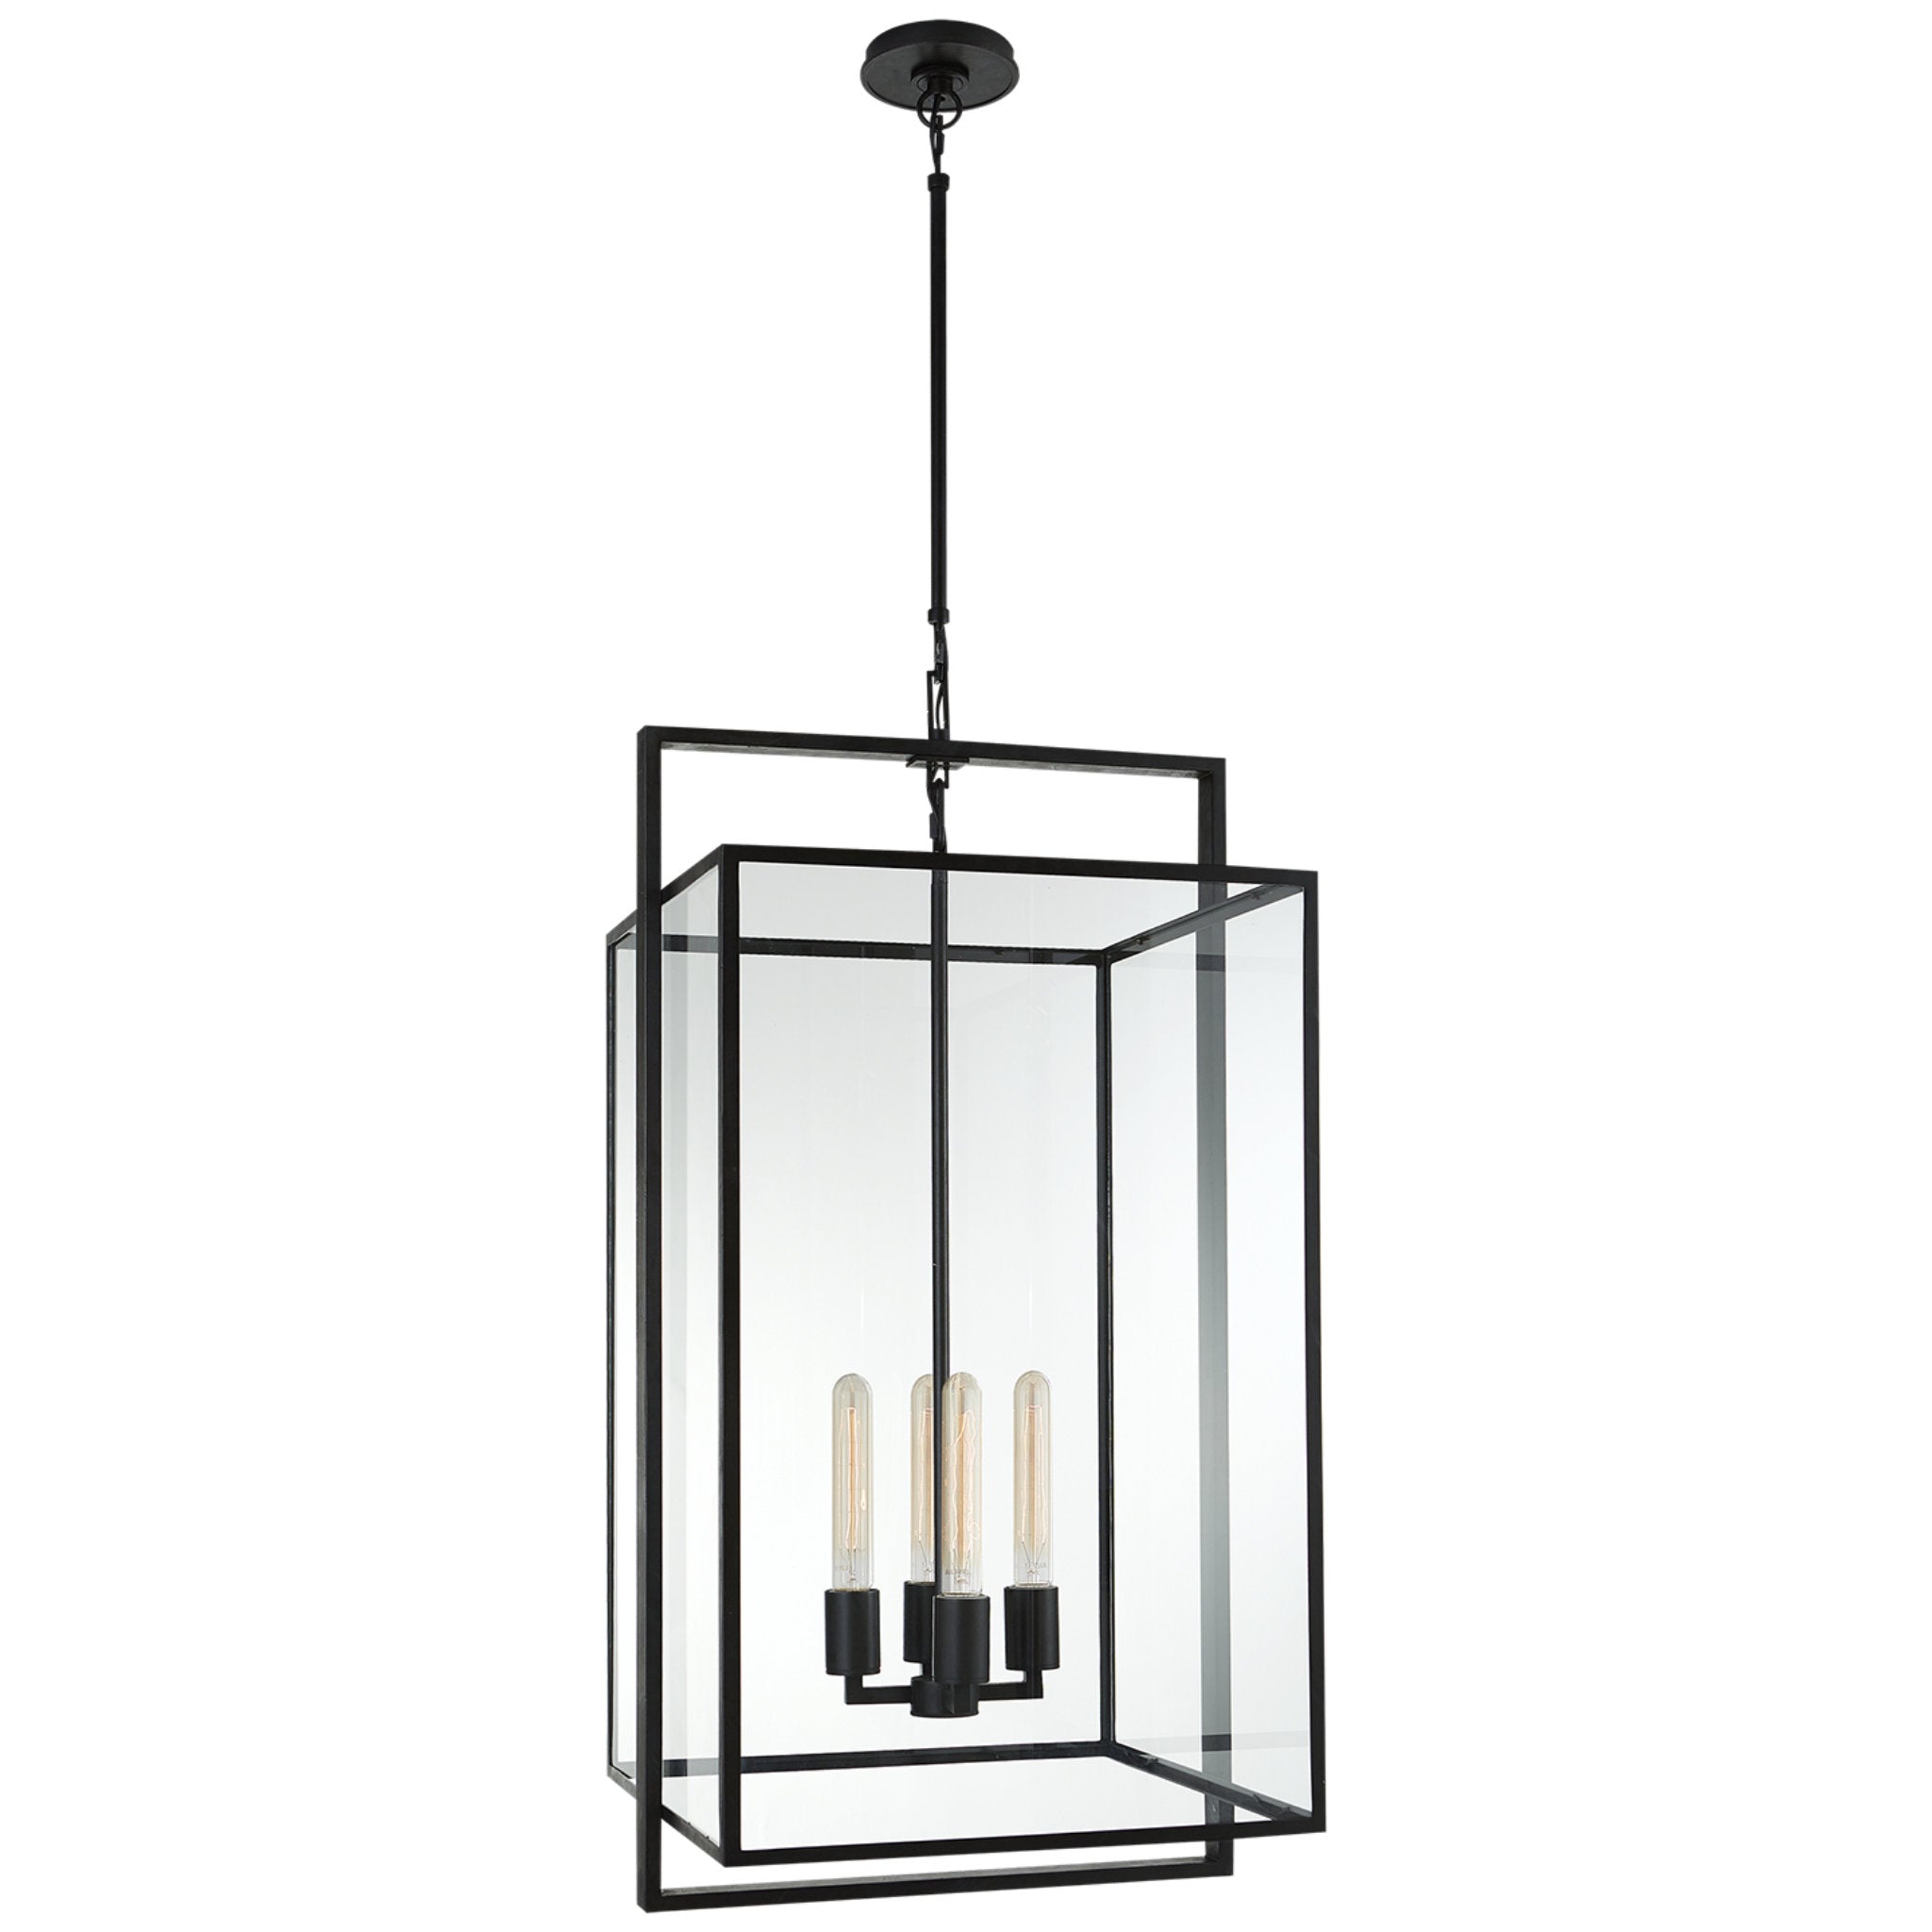 Ian K. Fowler Halle Medium Lantern in Aged Iron with Clear Glass